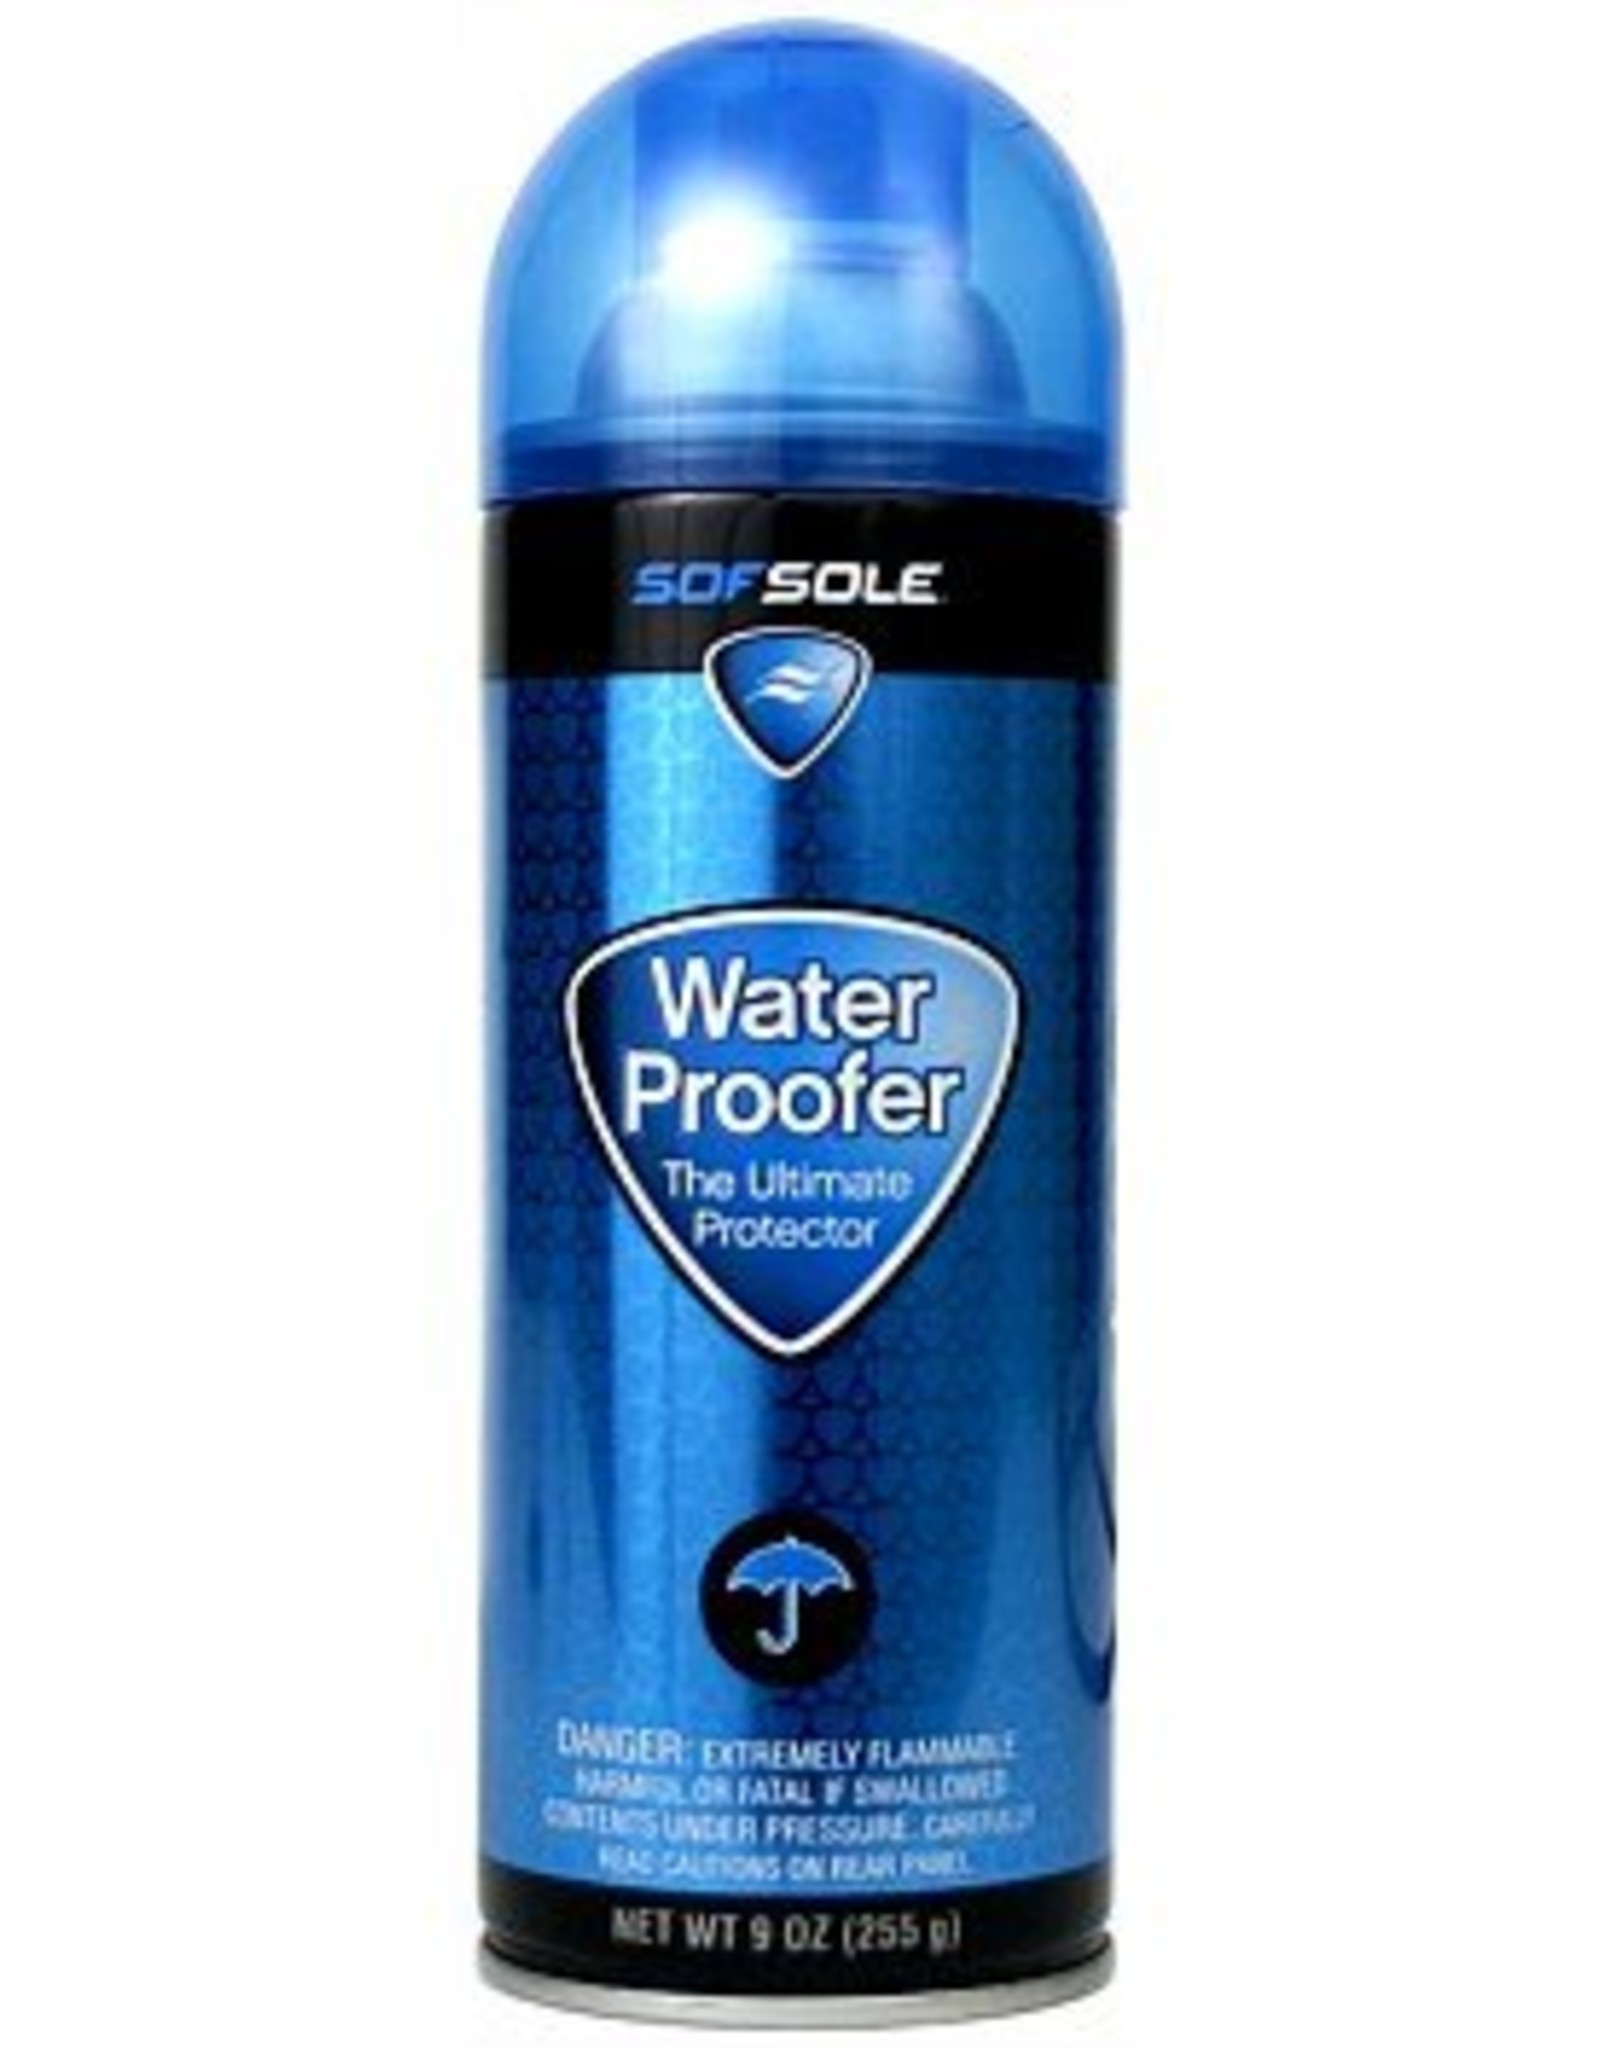 SOF SOLE WATER PROOFER